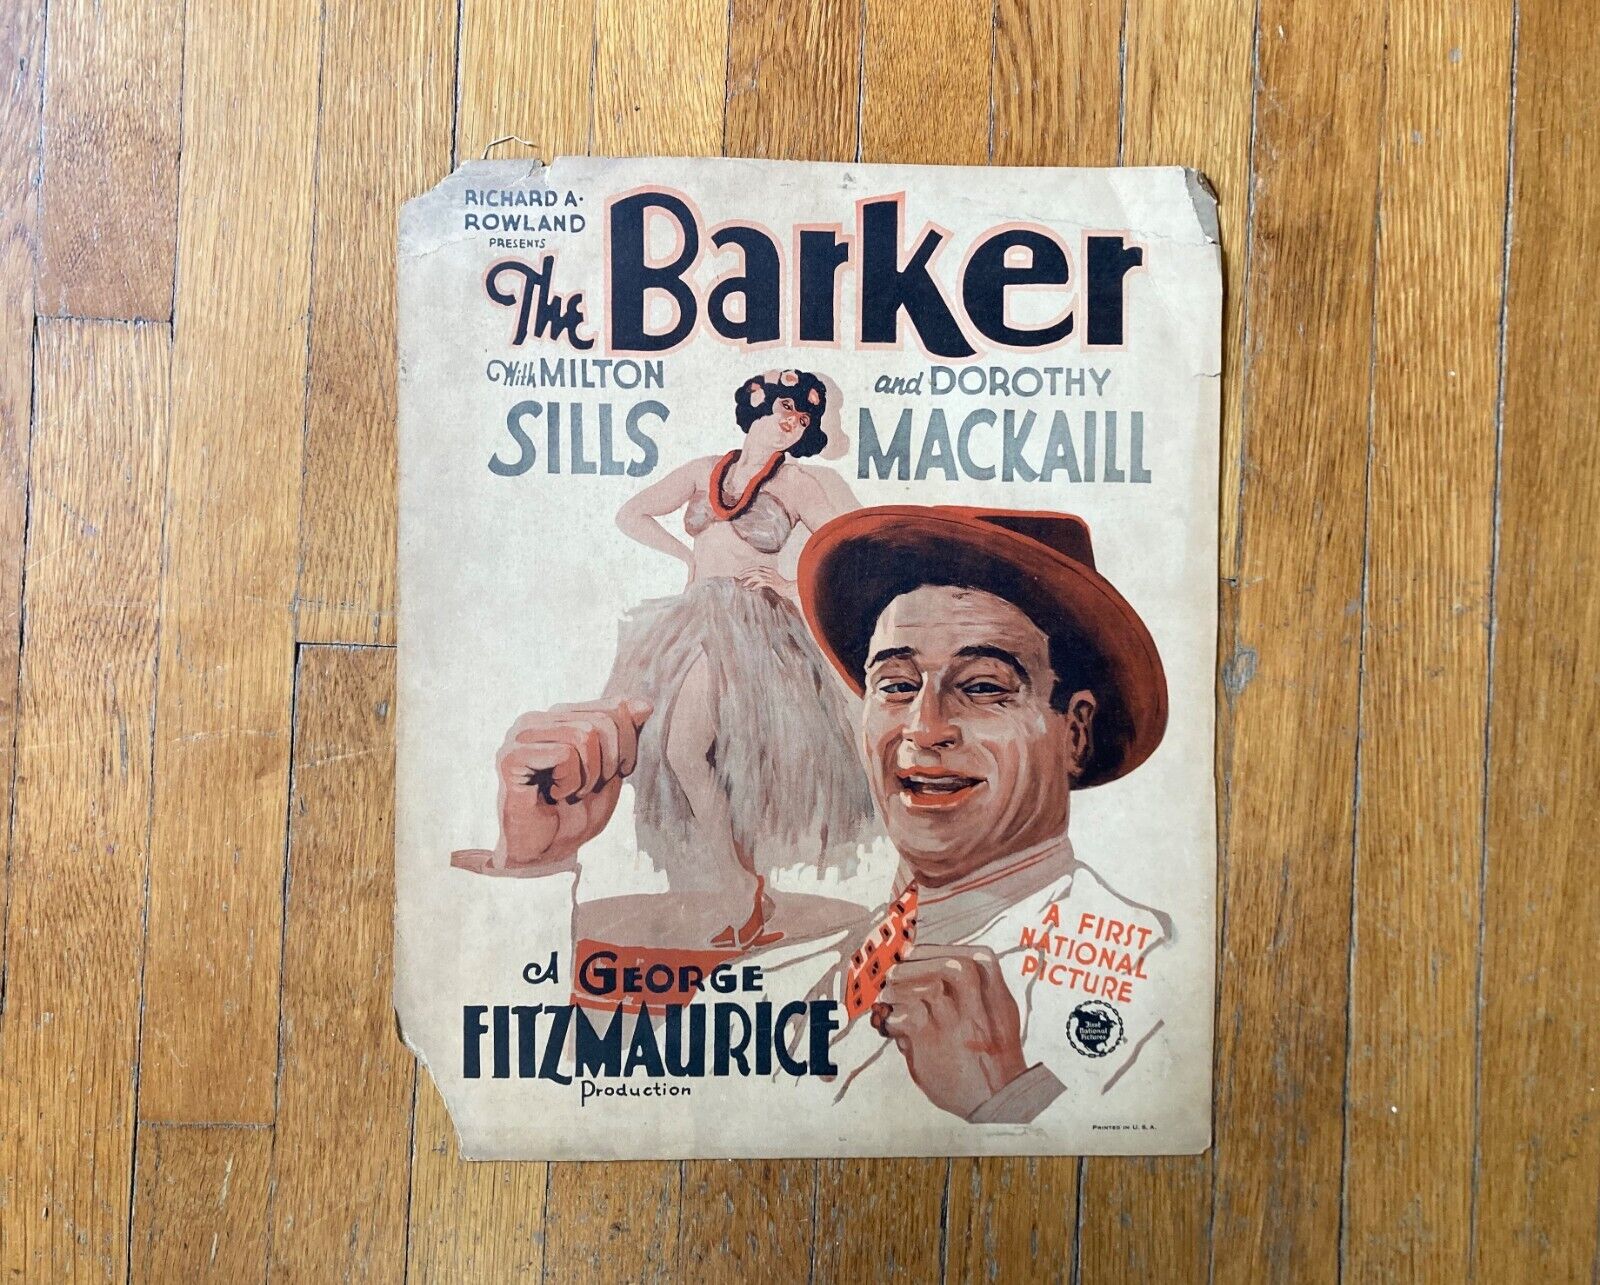 Vtg 1928 THE BARKER Sills Mackaill Movie POSTER First National Pictures 14 x 17\